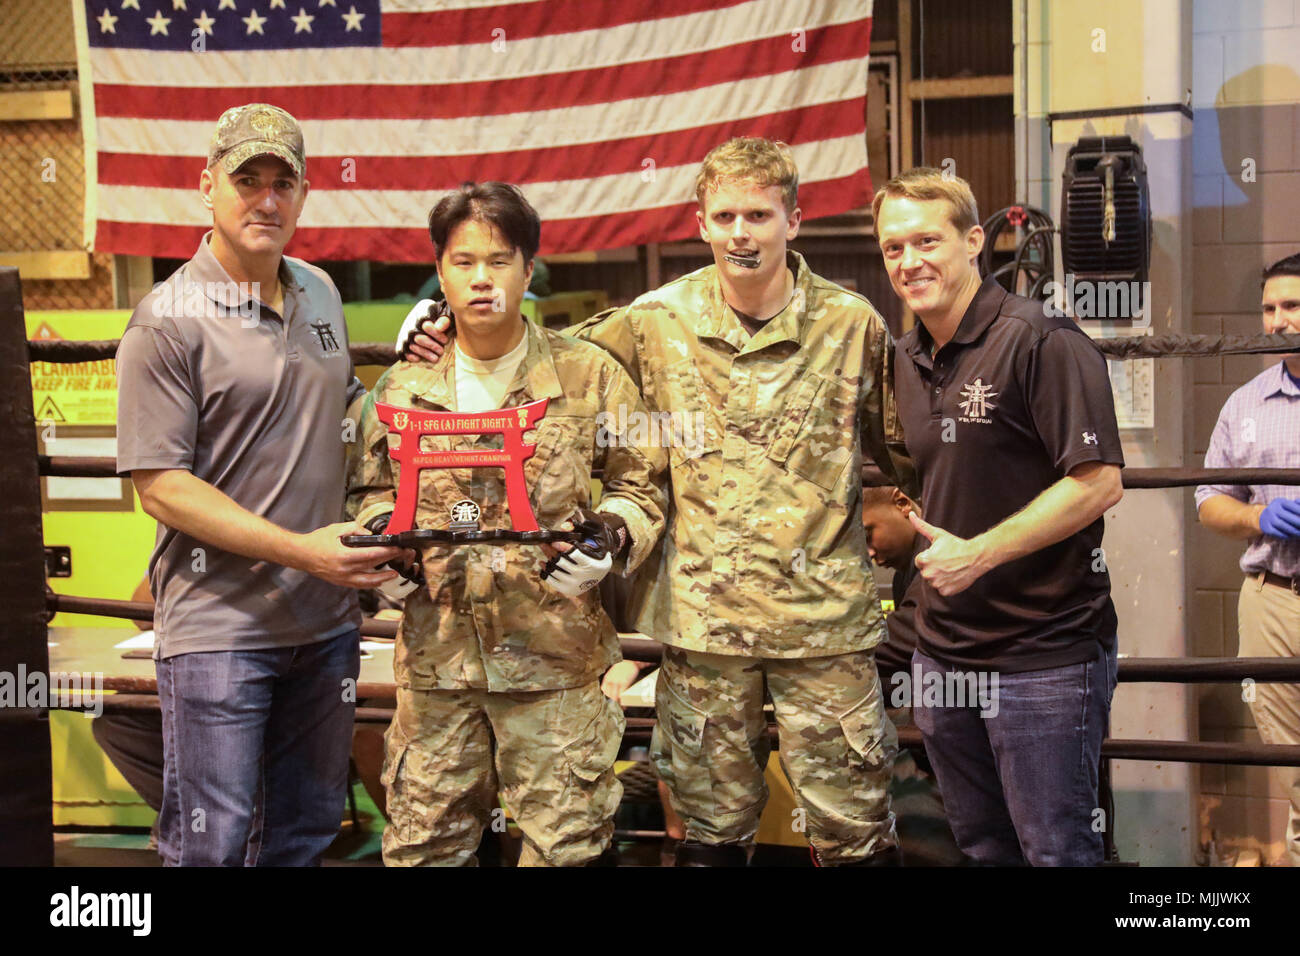 Staff Sgt Michael Ngchie Assigned To 1st Battalion 1st Special Forces Group Airborne Receives An Award As The Winner Of The Lightweight Championship Bout During The 10th 1st Battalion 1st Special Forces